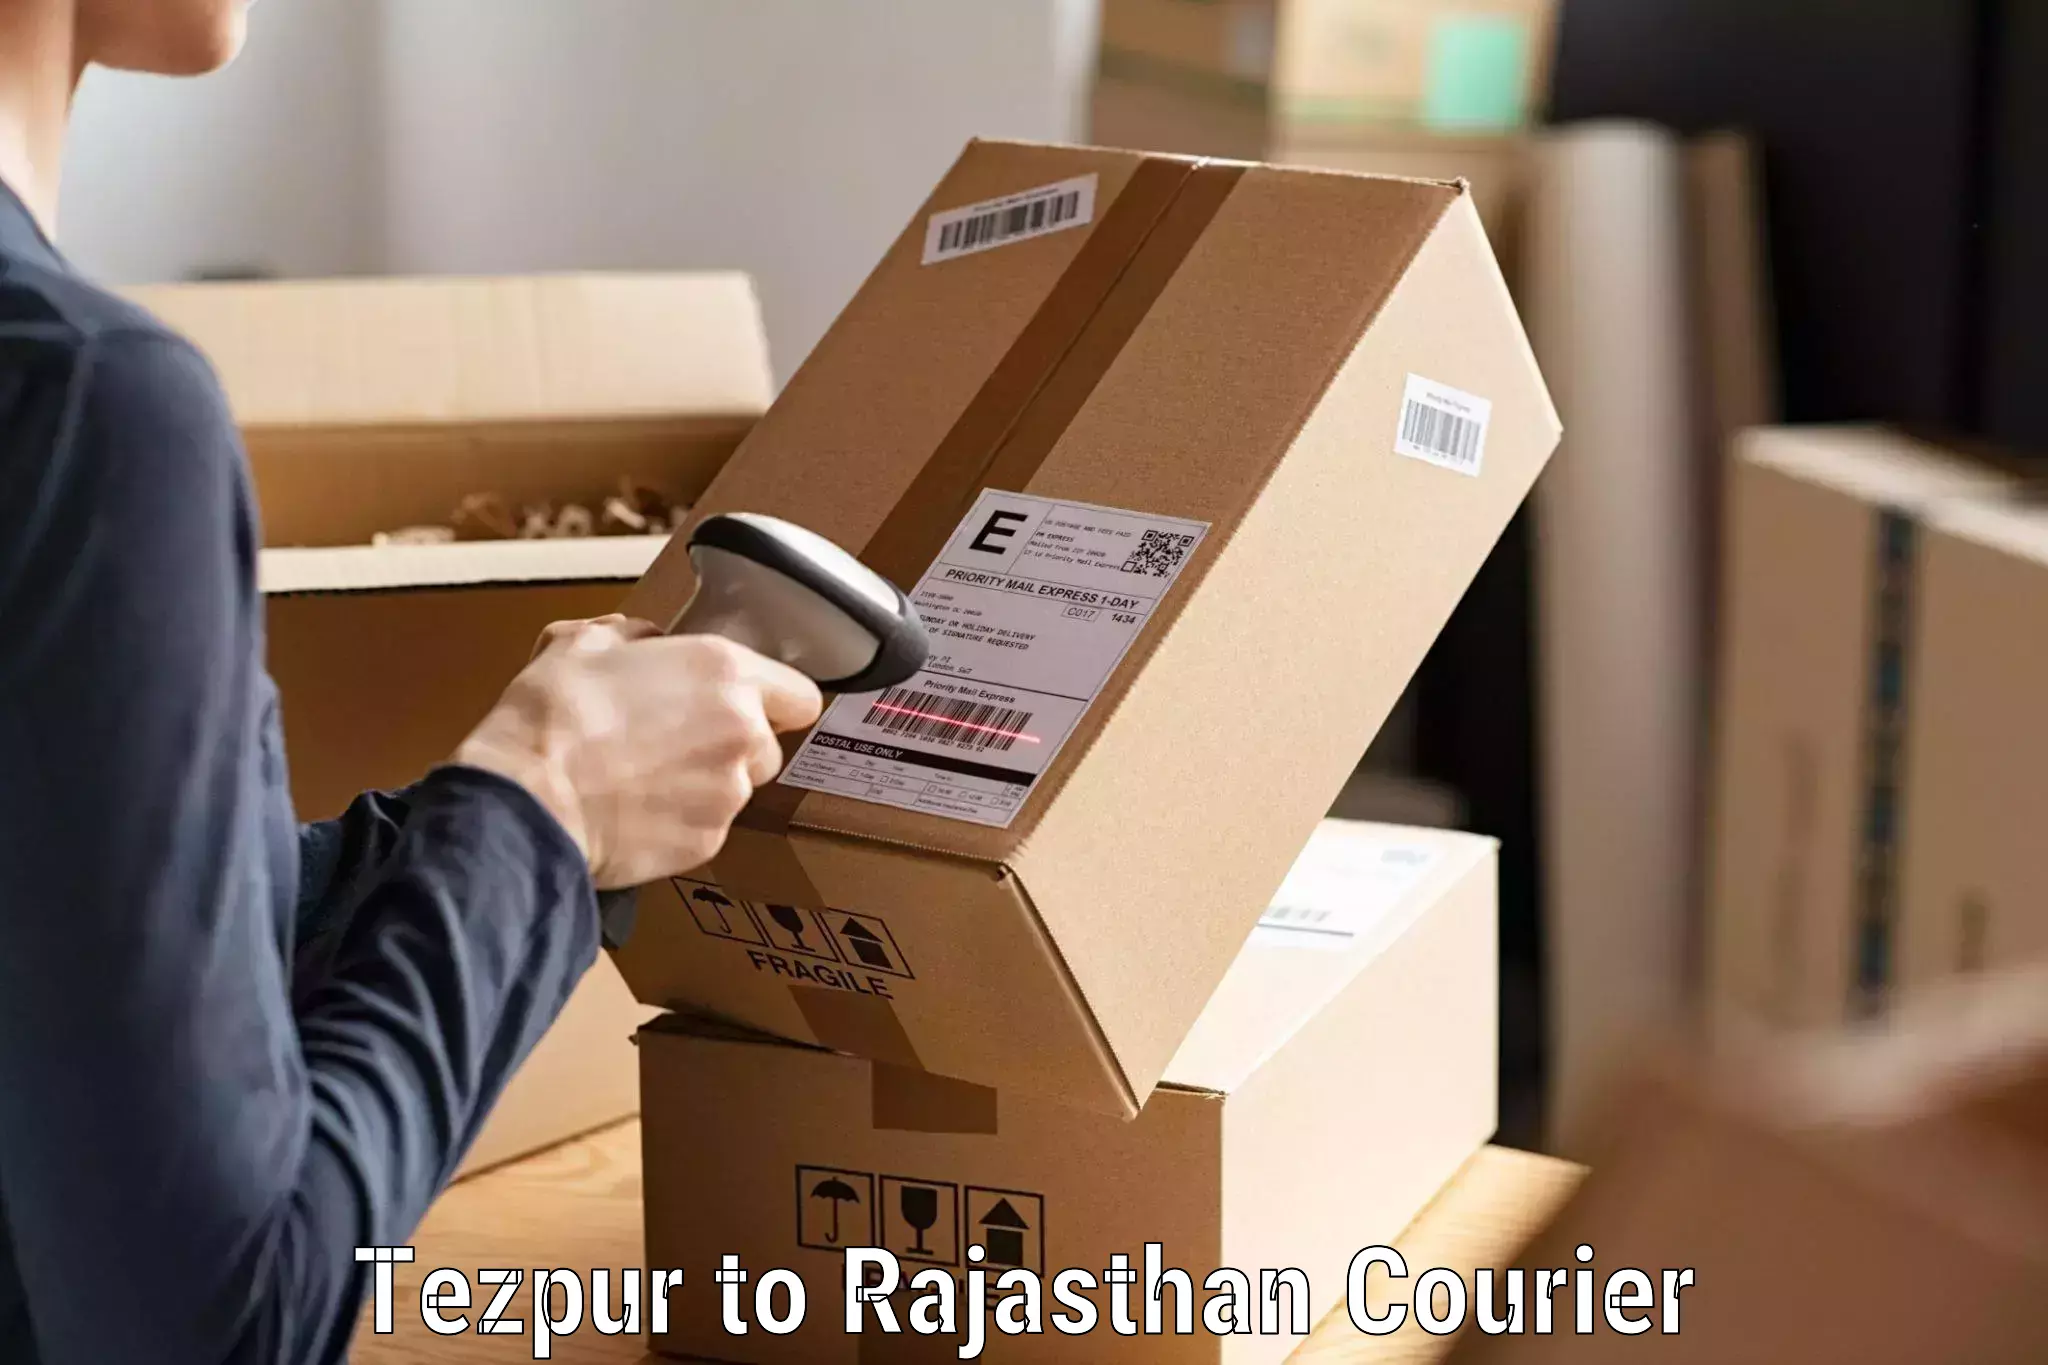 Efficient order fulfillment Tezpur to Rajasthan